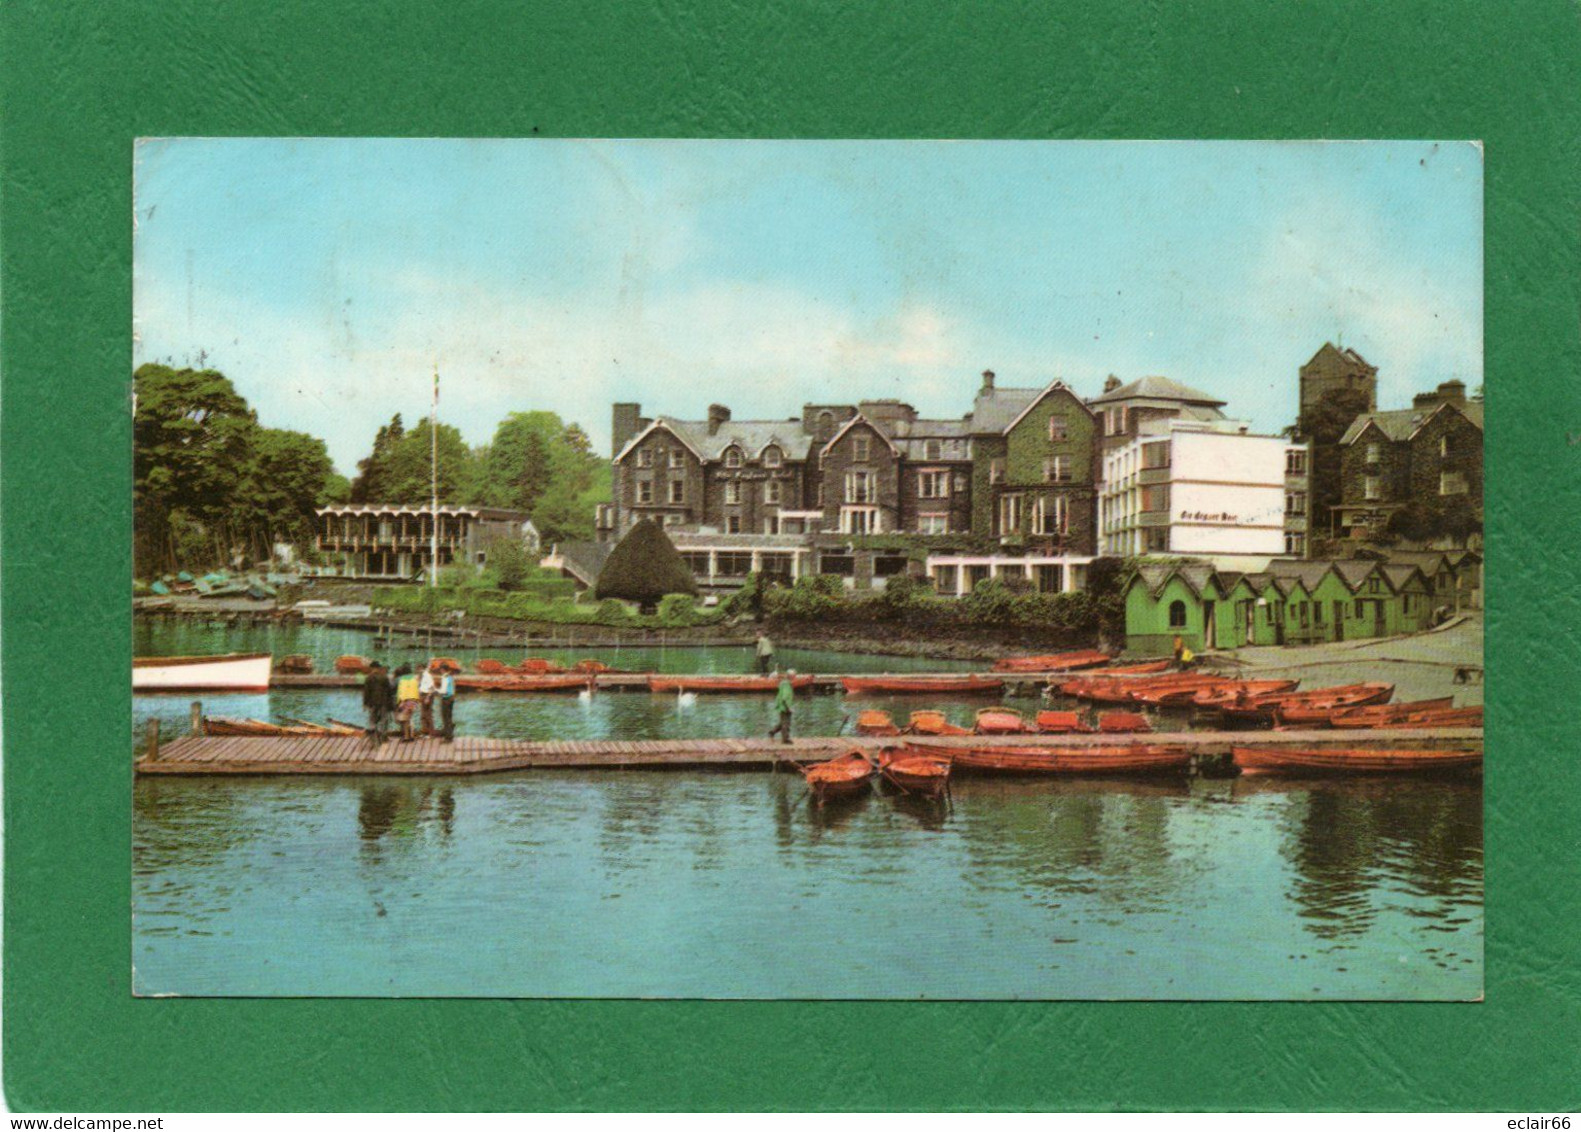 BOWNESS ON WINDERMERE THE OLD ENGLAND HOTEL OLD R/P POSTCARD CUMBRIA 1973 - Windermere